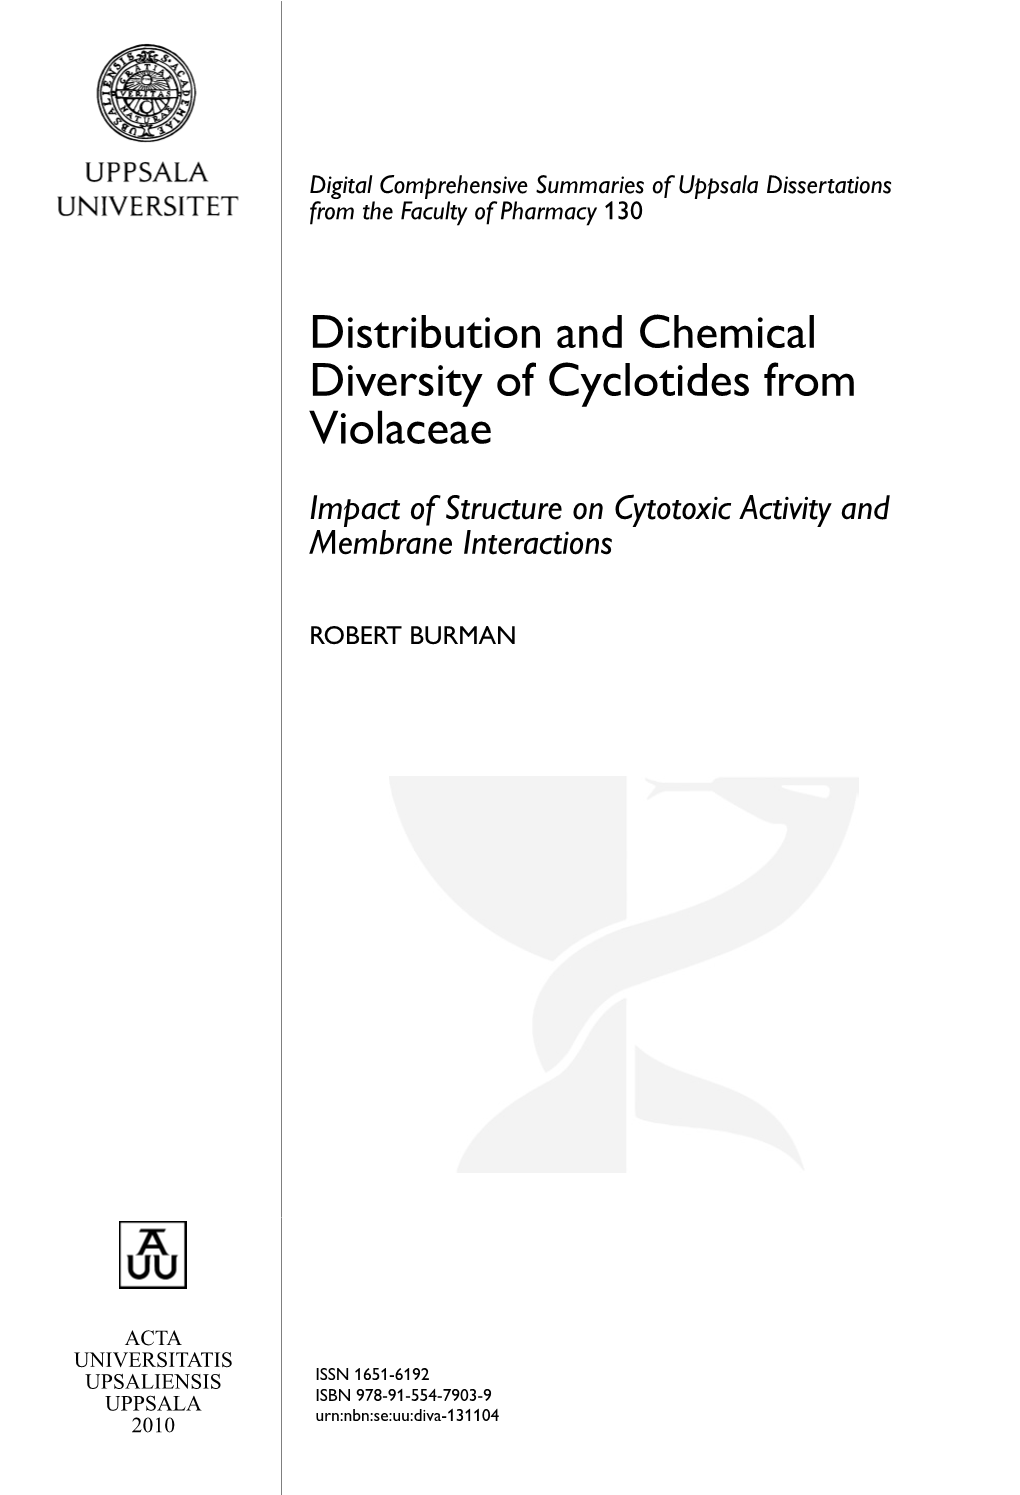 Distribution and Chemical Diversity of Cyclotides From